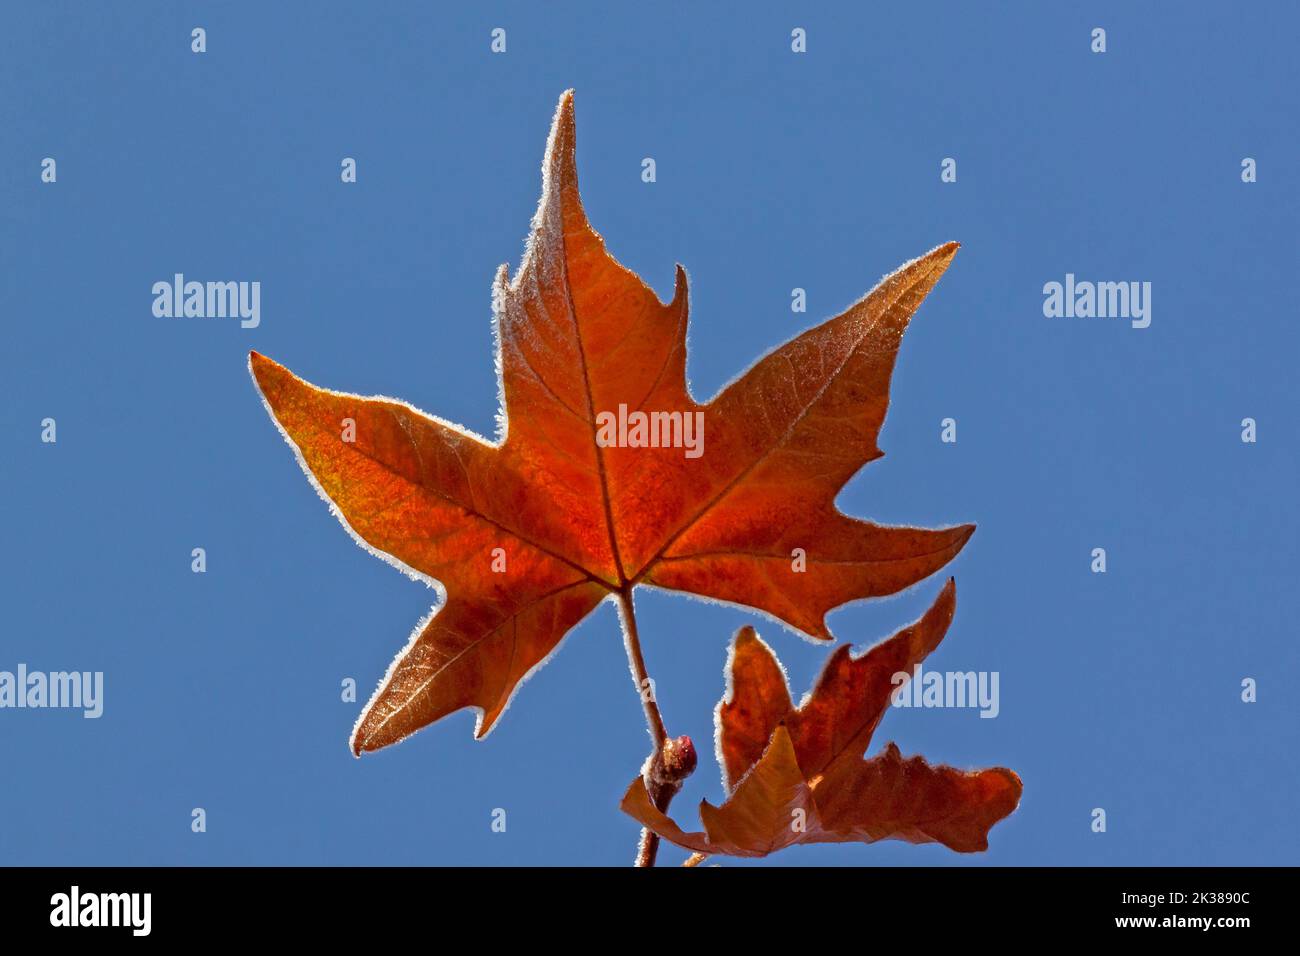 close up of dry maple leaf covered with hoar frost against blue sky Stock Photo